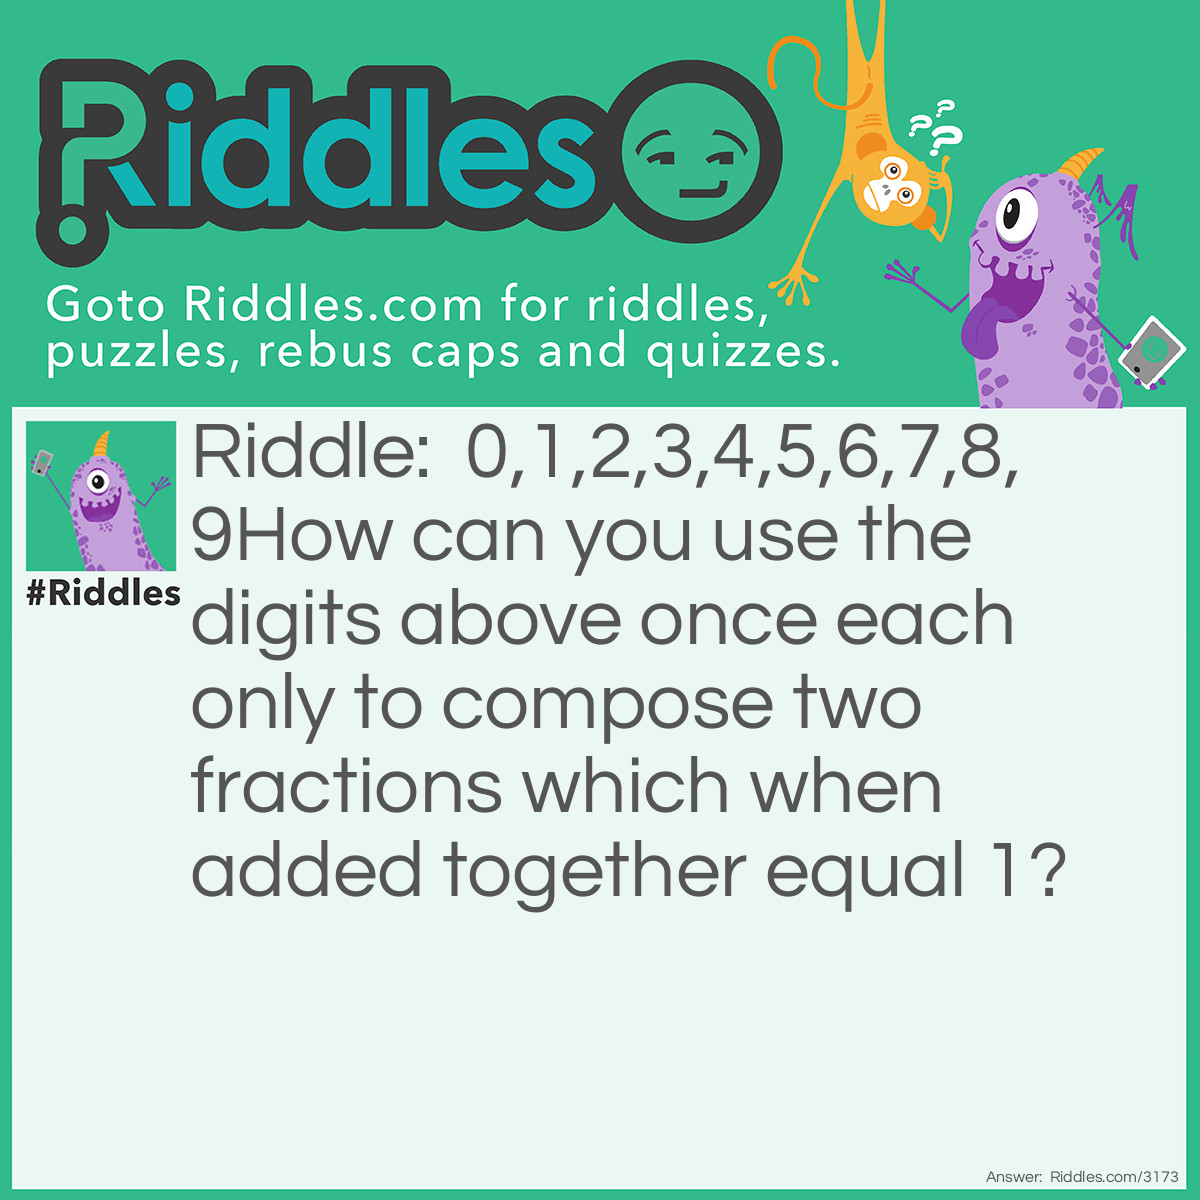 Riddle: 0,1,2,3,4,5,6,7,8,9
How can you use the digits above once each only to compose two fractions which when added together equal 1? Answer: 35/70 + 148/296 = 1